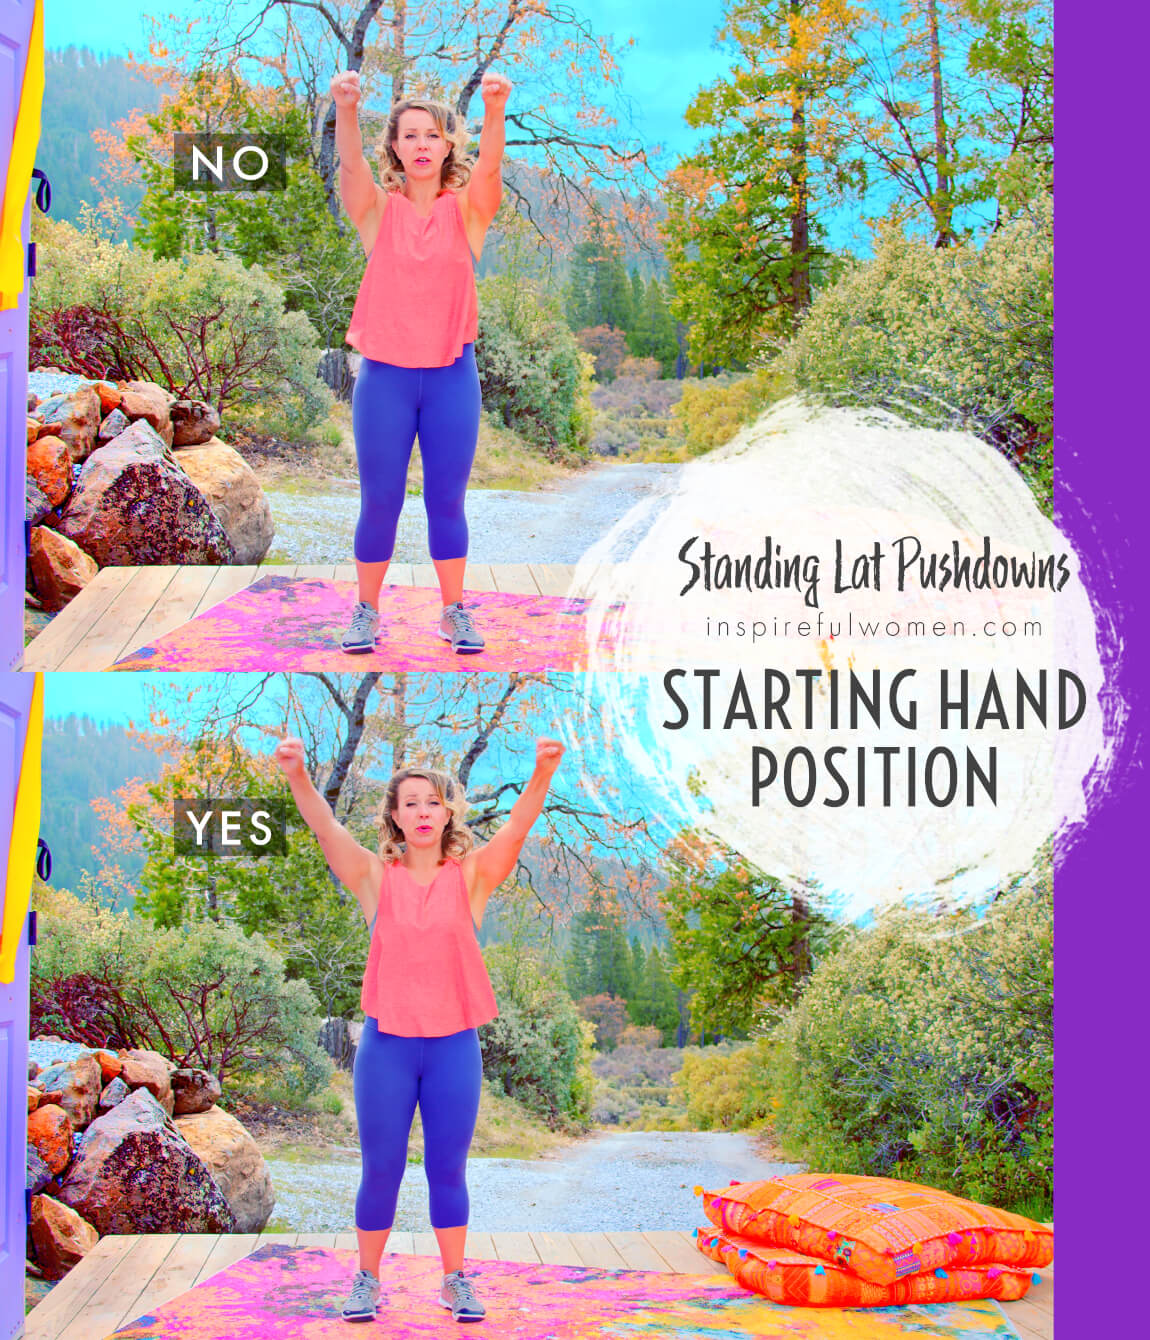 starting-hand-position-standing-lat-push-down-back-workouts-for-women-40-plus